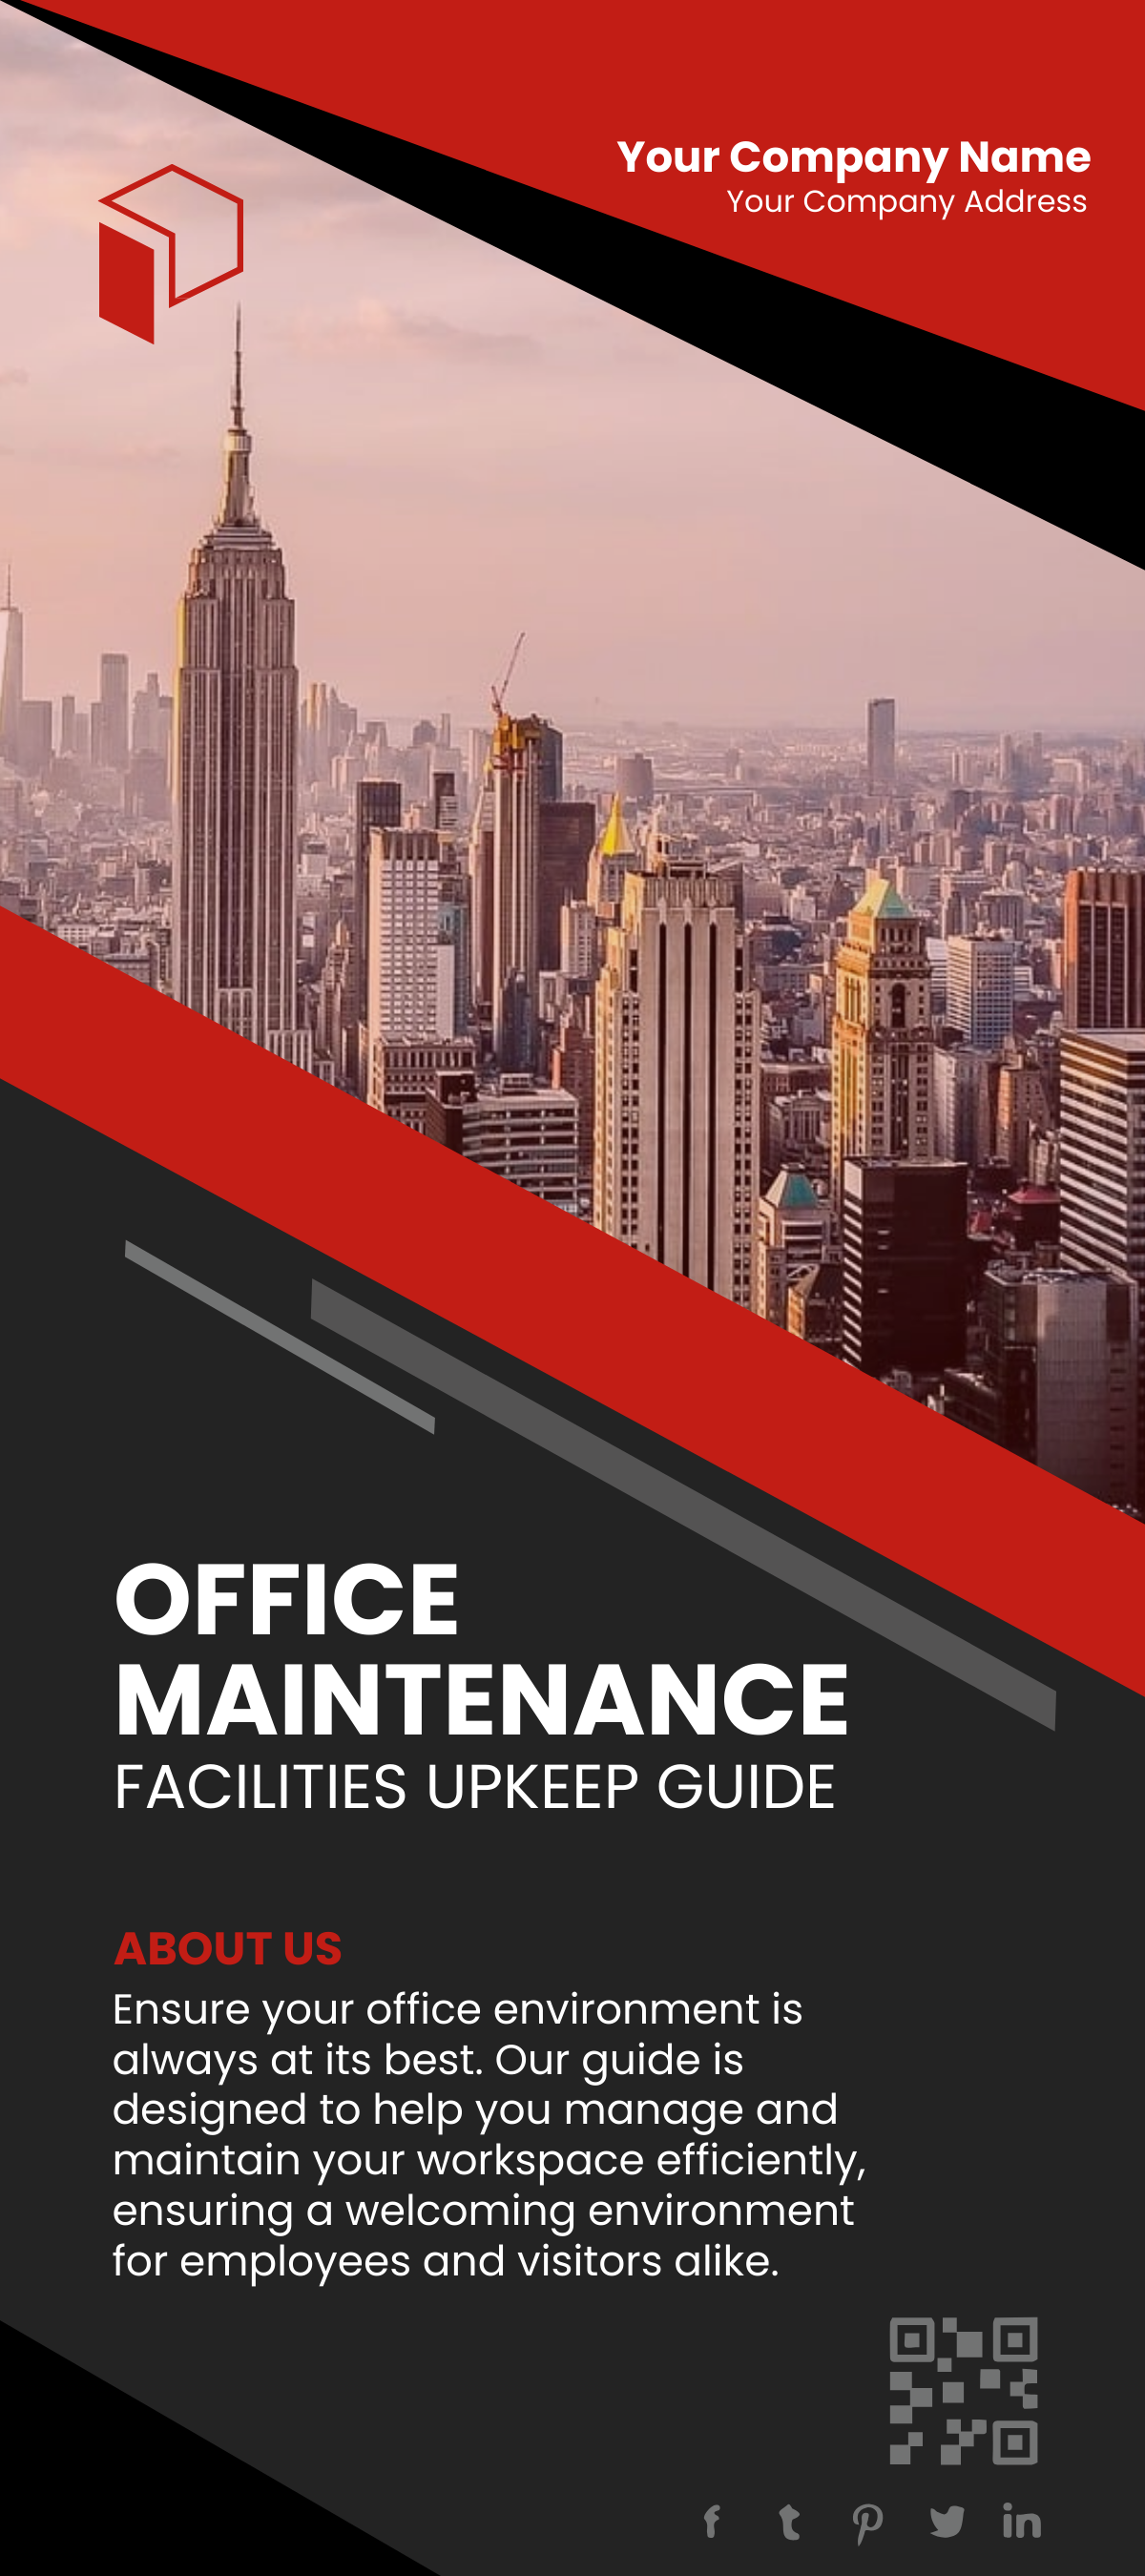 Office Maintenance and Facilities Upkeep Guide Rack Card Template